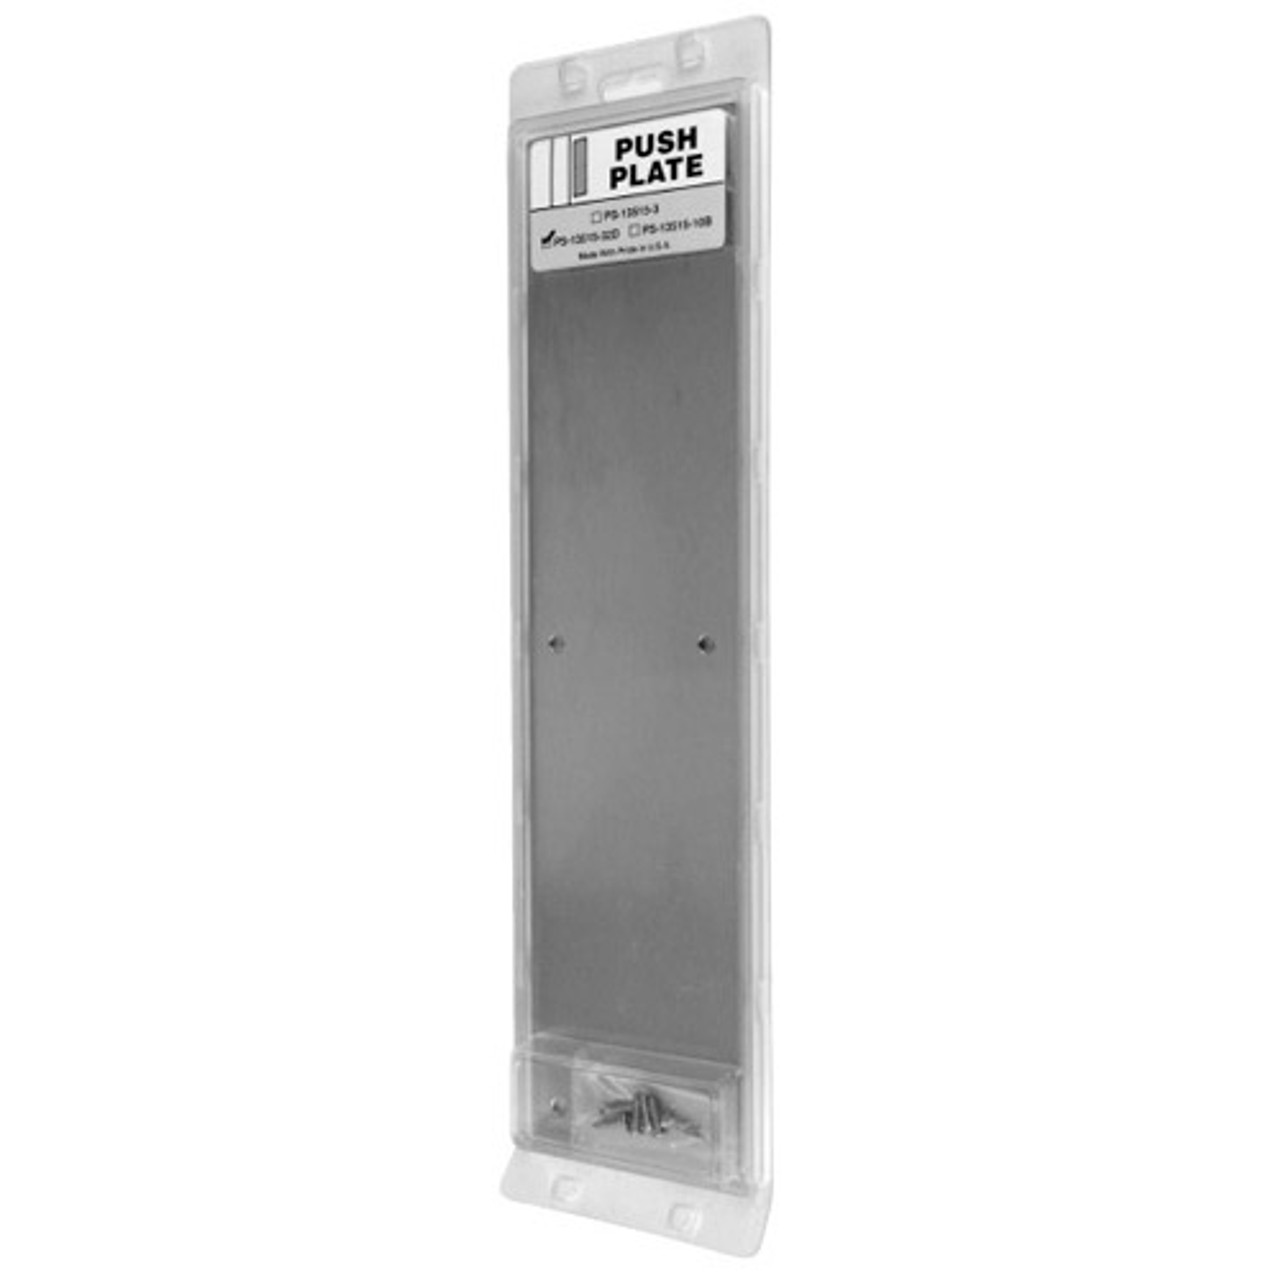 PS-13515-630 Don Jo Push Plate in Satin Stainless Steel Finish